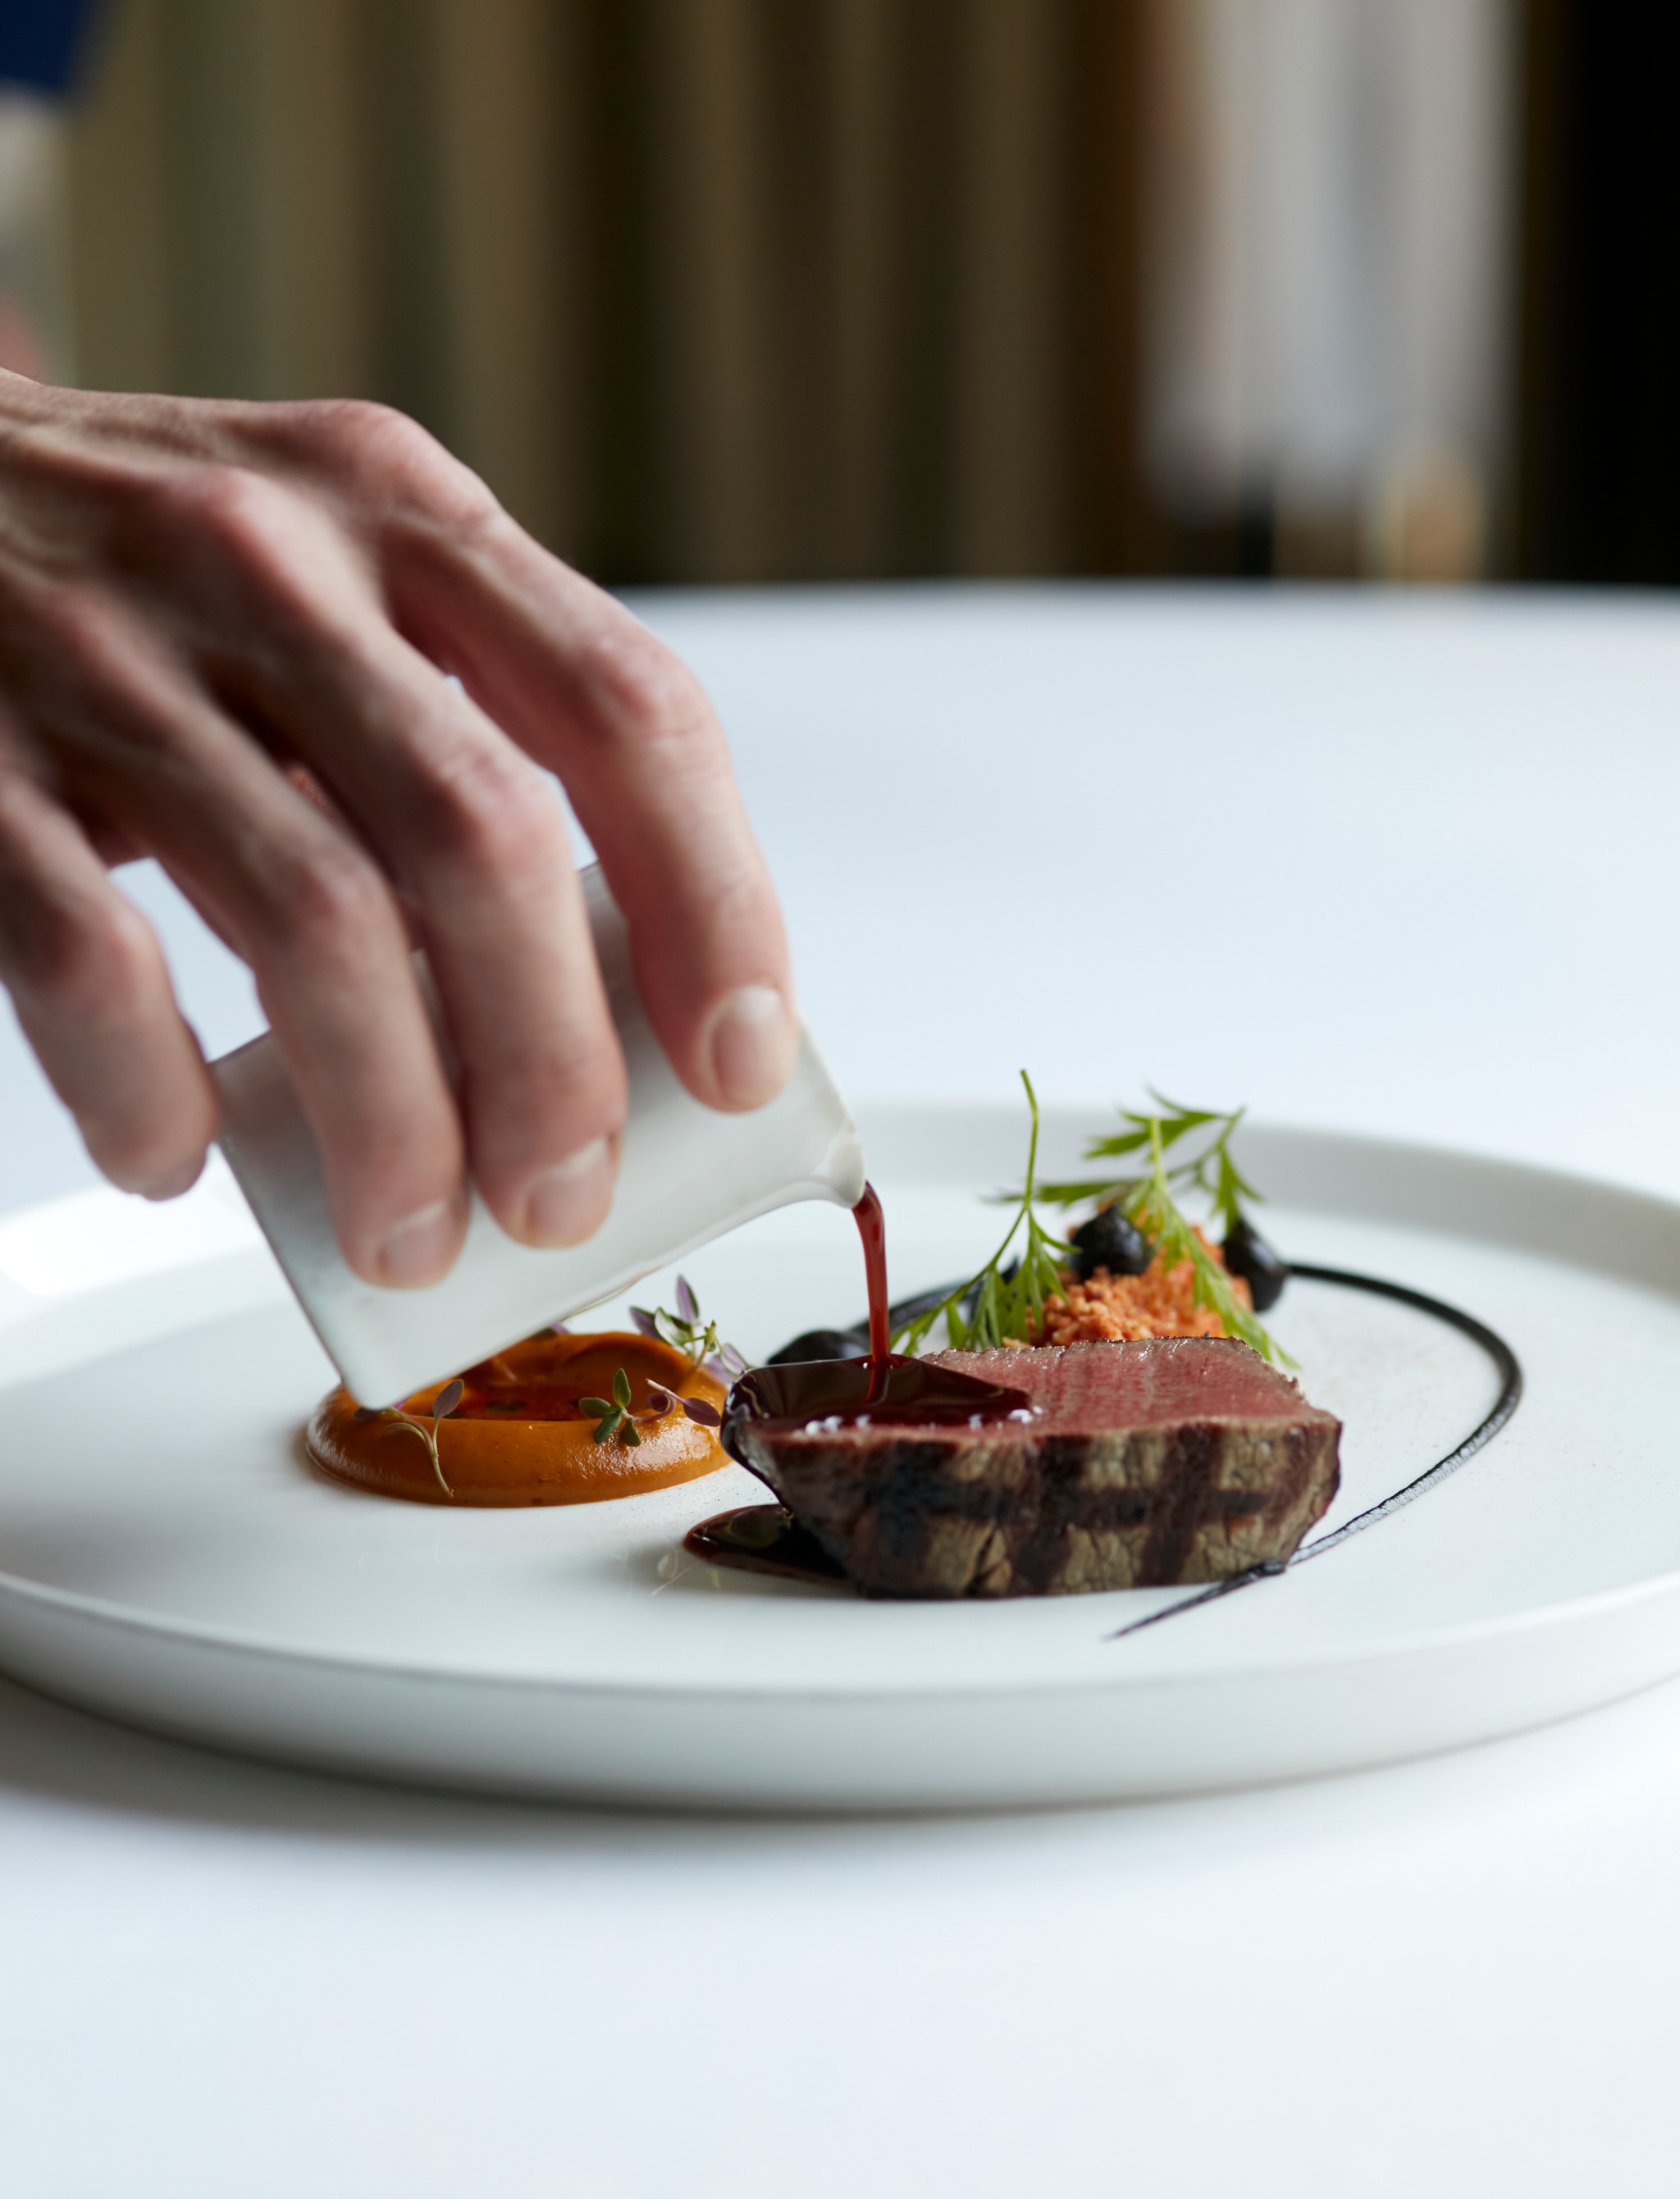 Sauce pouring over fillet of Galloway beef, served with carrot, pine nut and garlic 